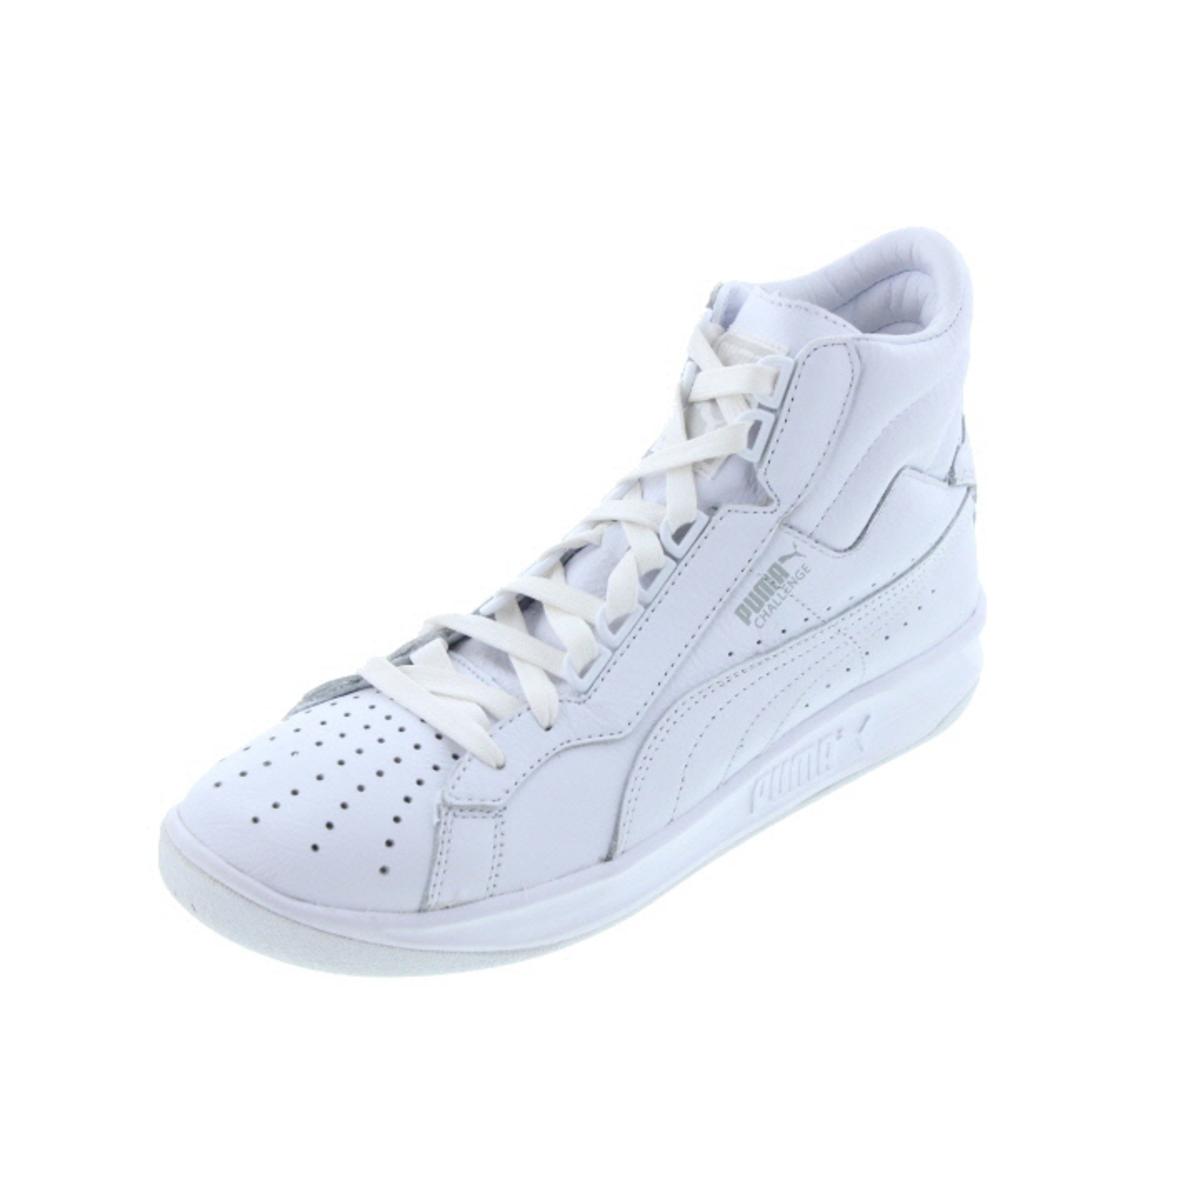 Puma 6192 Mens Challenge Leather Hi-Top Perforated Tennis Shoes ...